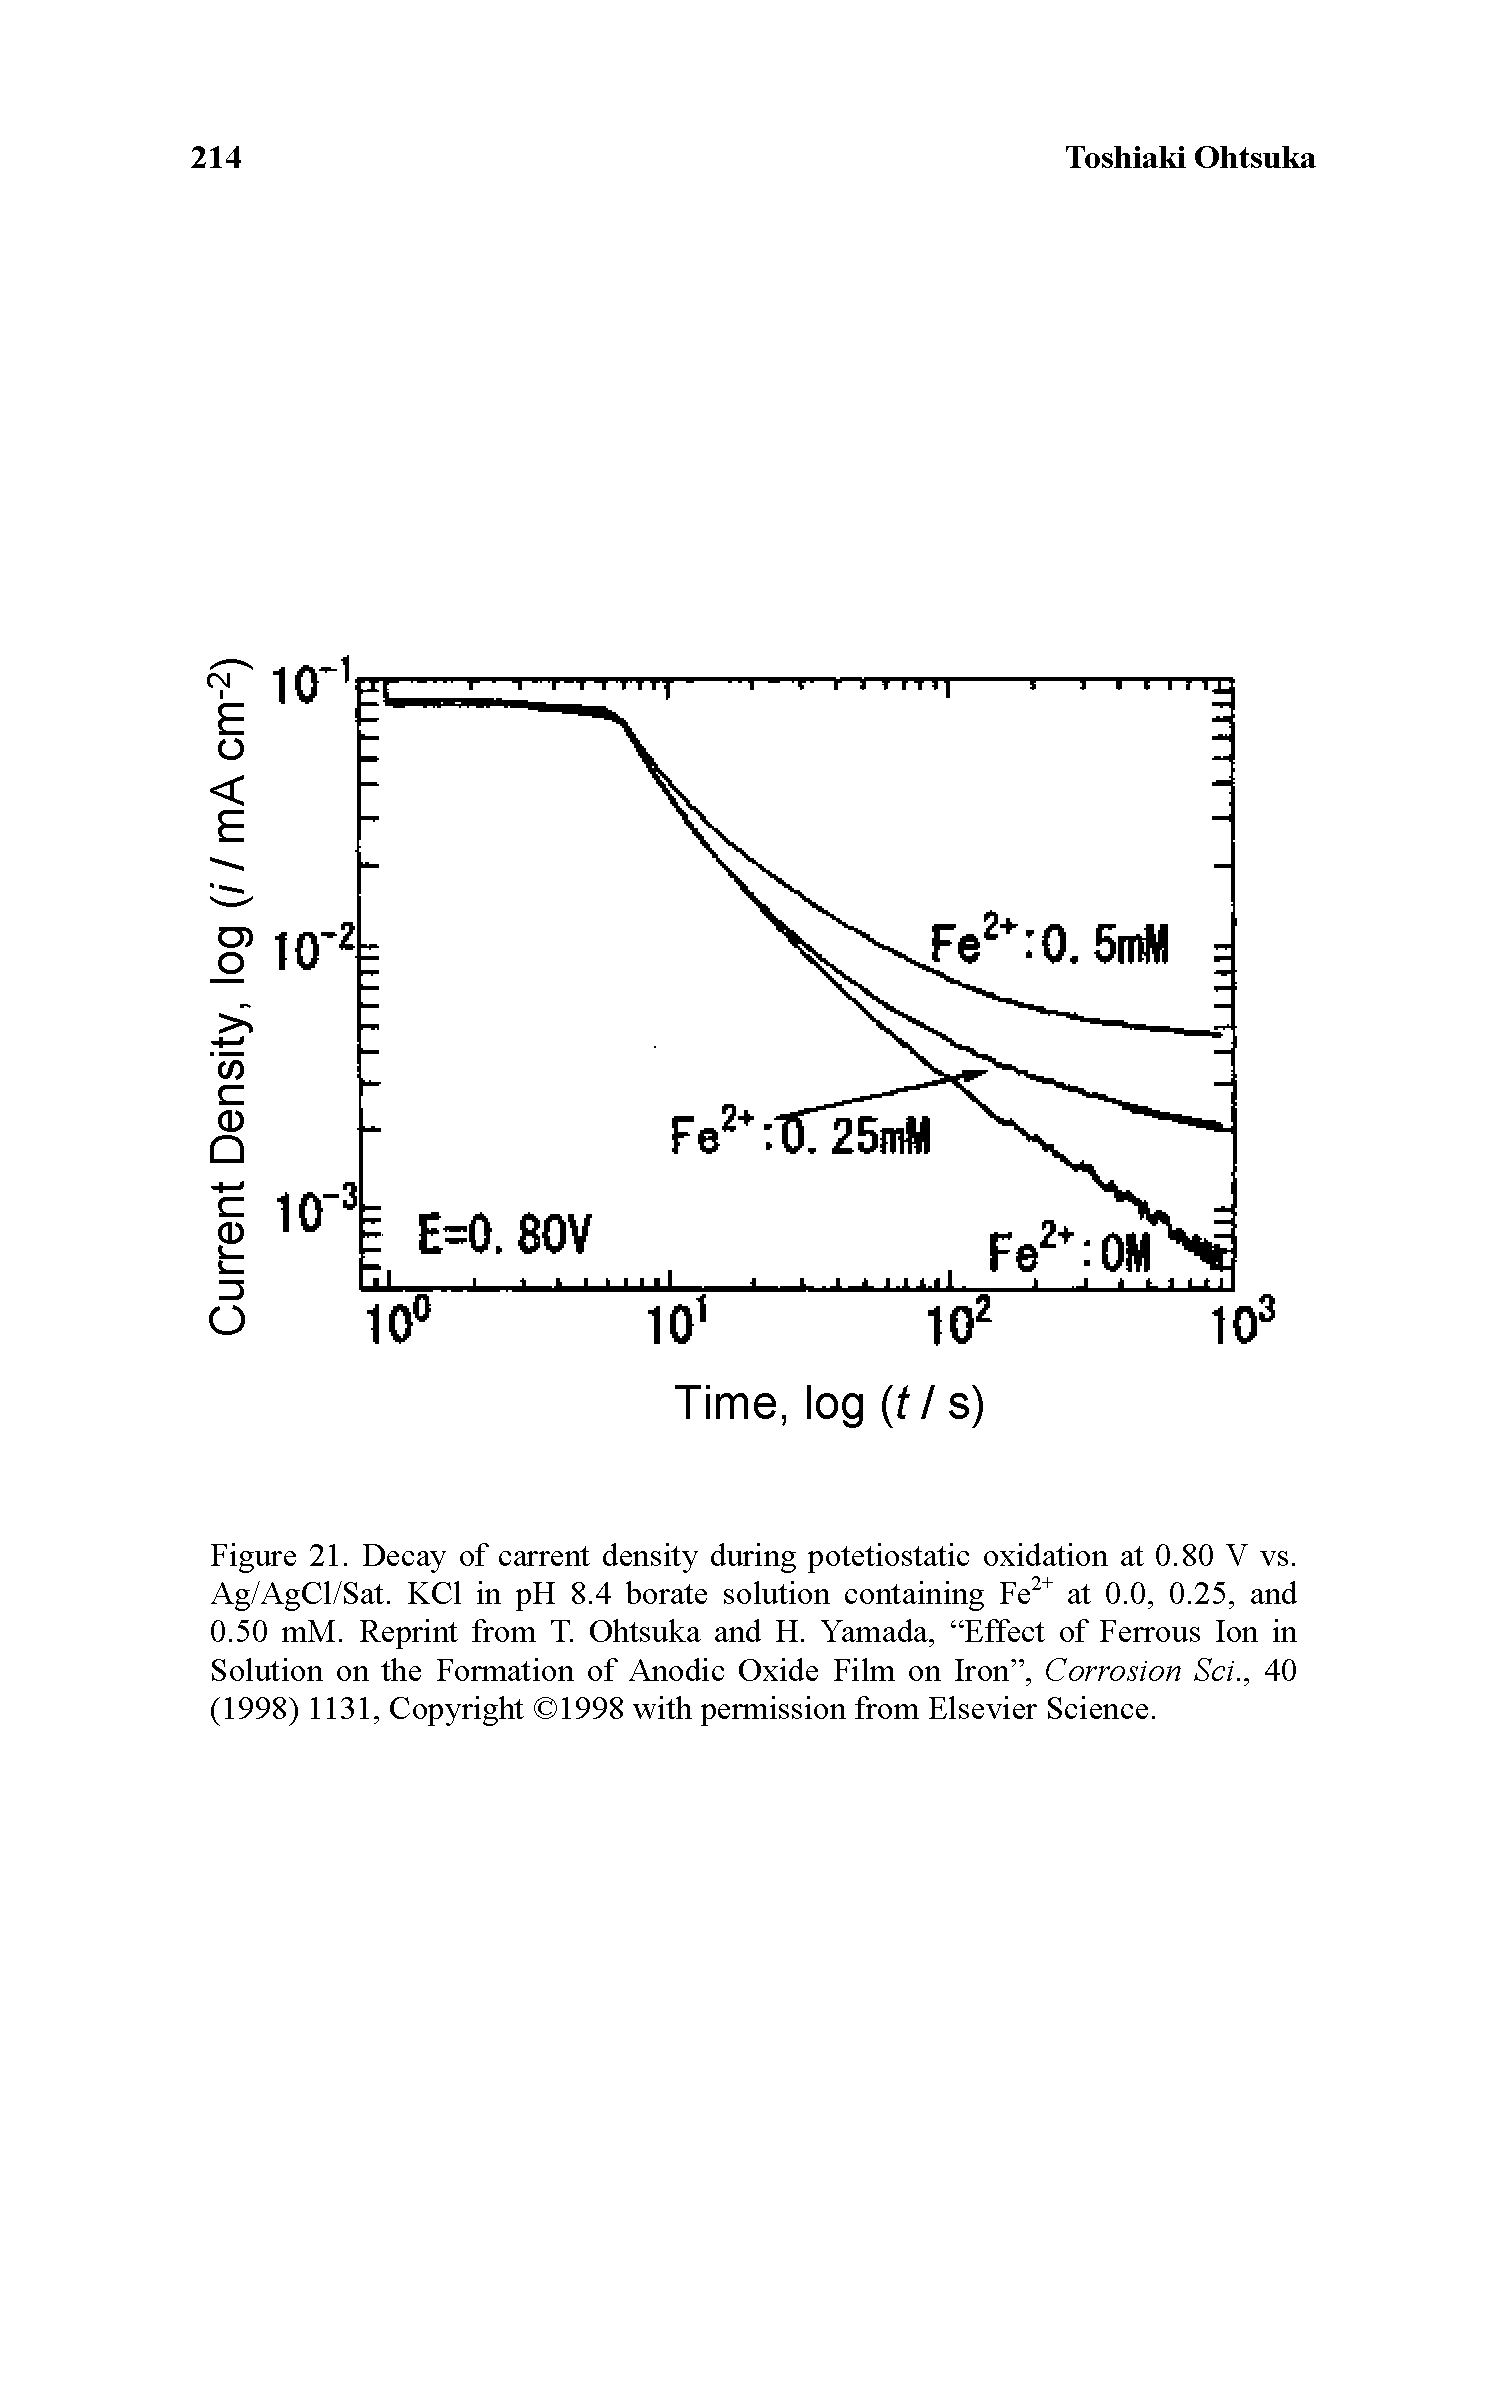 Figure 21. Decay of carrent density during potetiostatic oxidation at 0.80 V vs. Ag/AgCl/Sat. KCl in pH 8.4 borate solution containing Fe at 0.0, 0.25, and 0.50 mM. Reprint from T. Ohtsuka and H. Yamada, Effect of Ferrous Ion in Solution on the Formation of Anodic Oxide Film on Iron , Corrosion Sci., 40 (1998) 1131, Copyright 1998 with permission from Elsevier Science.